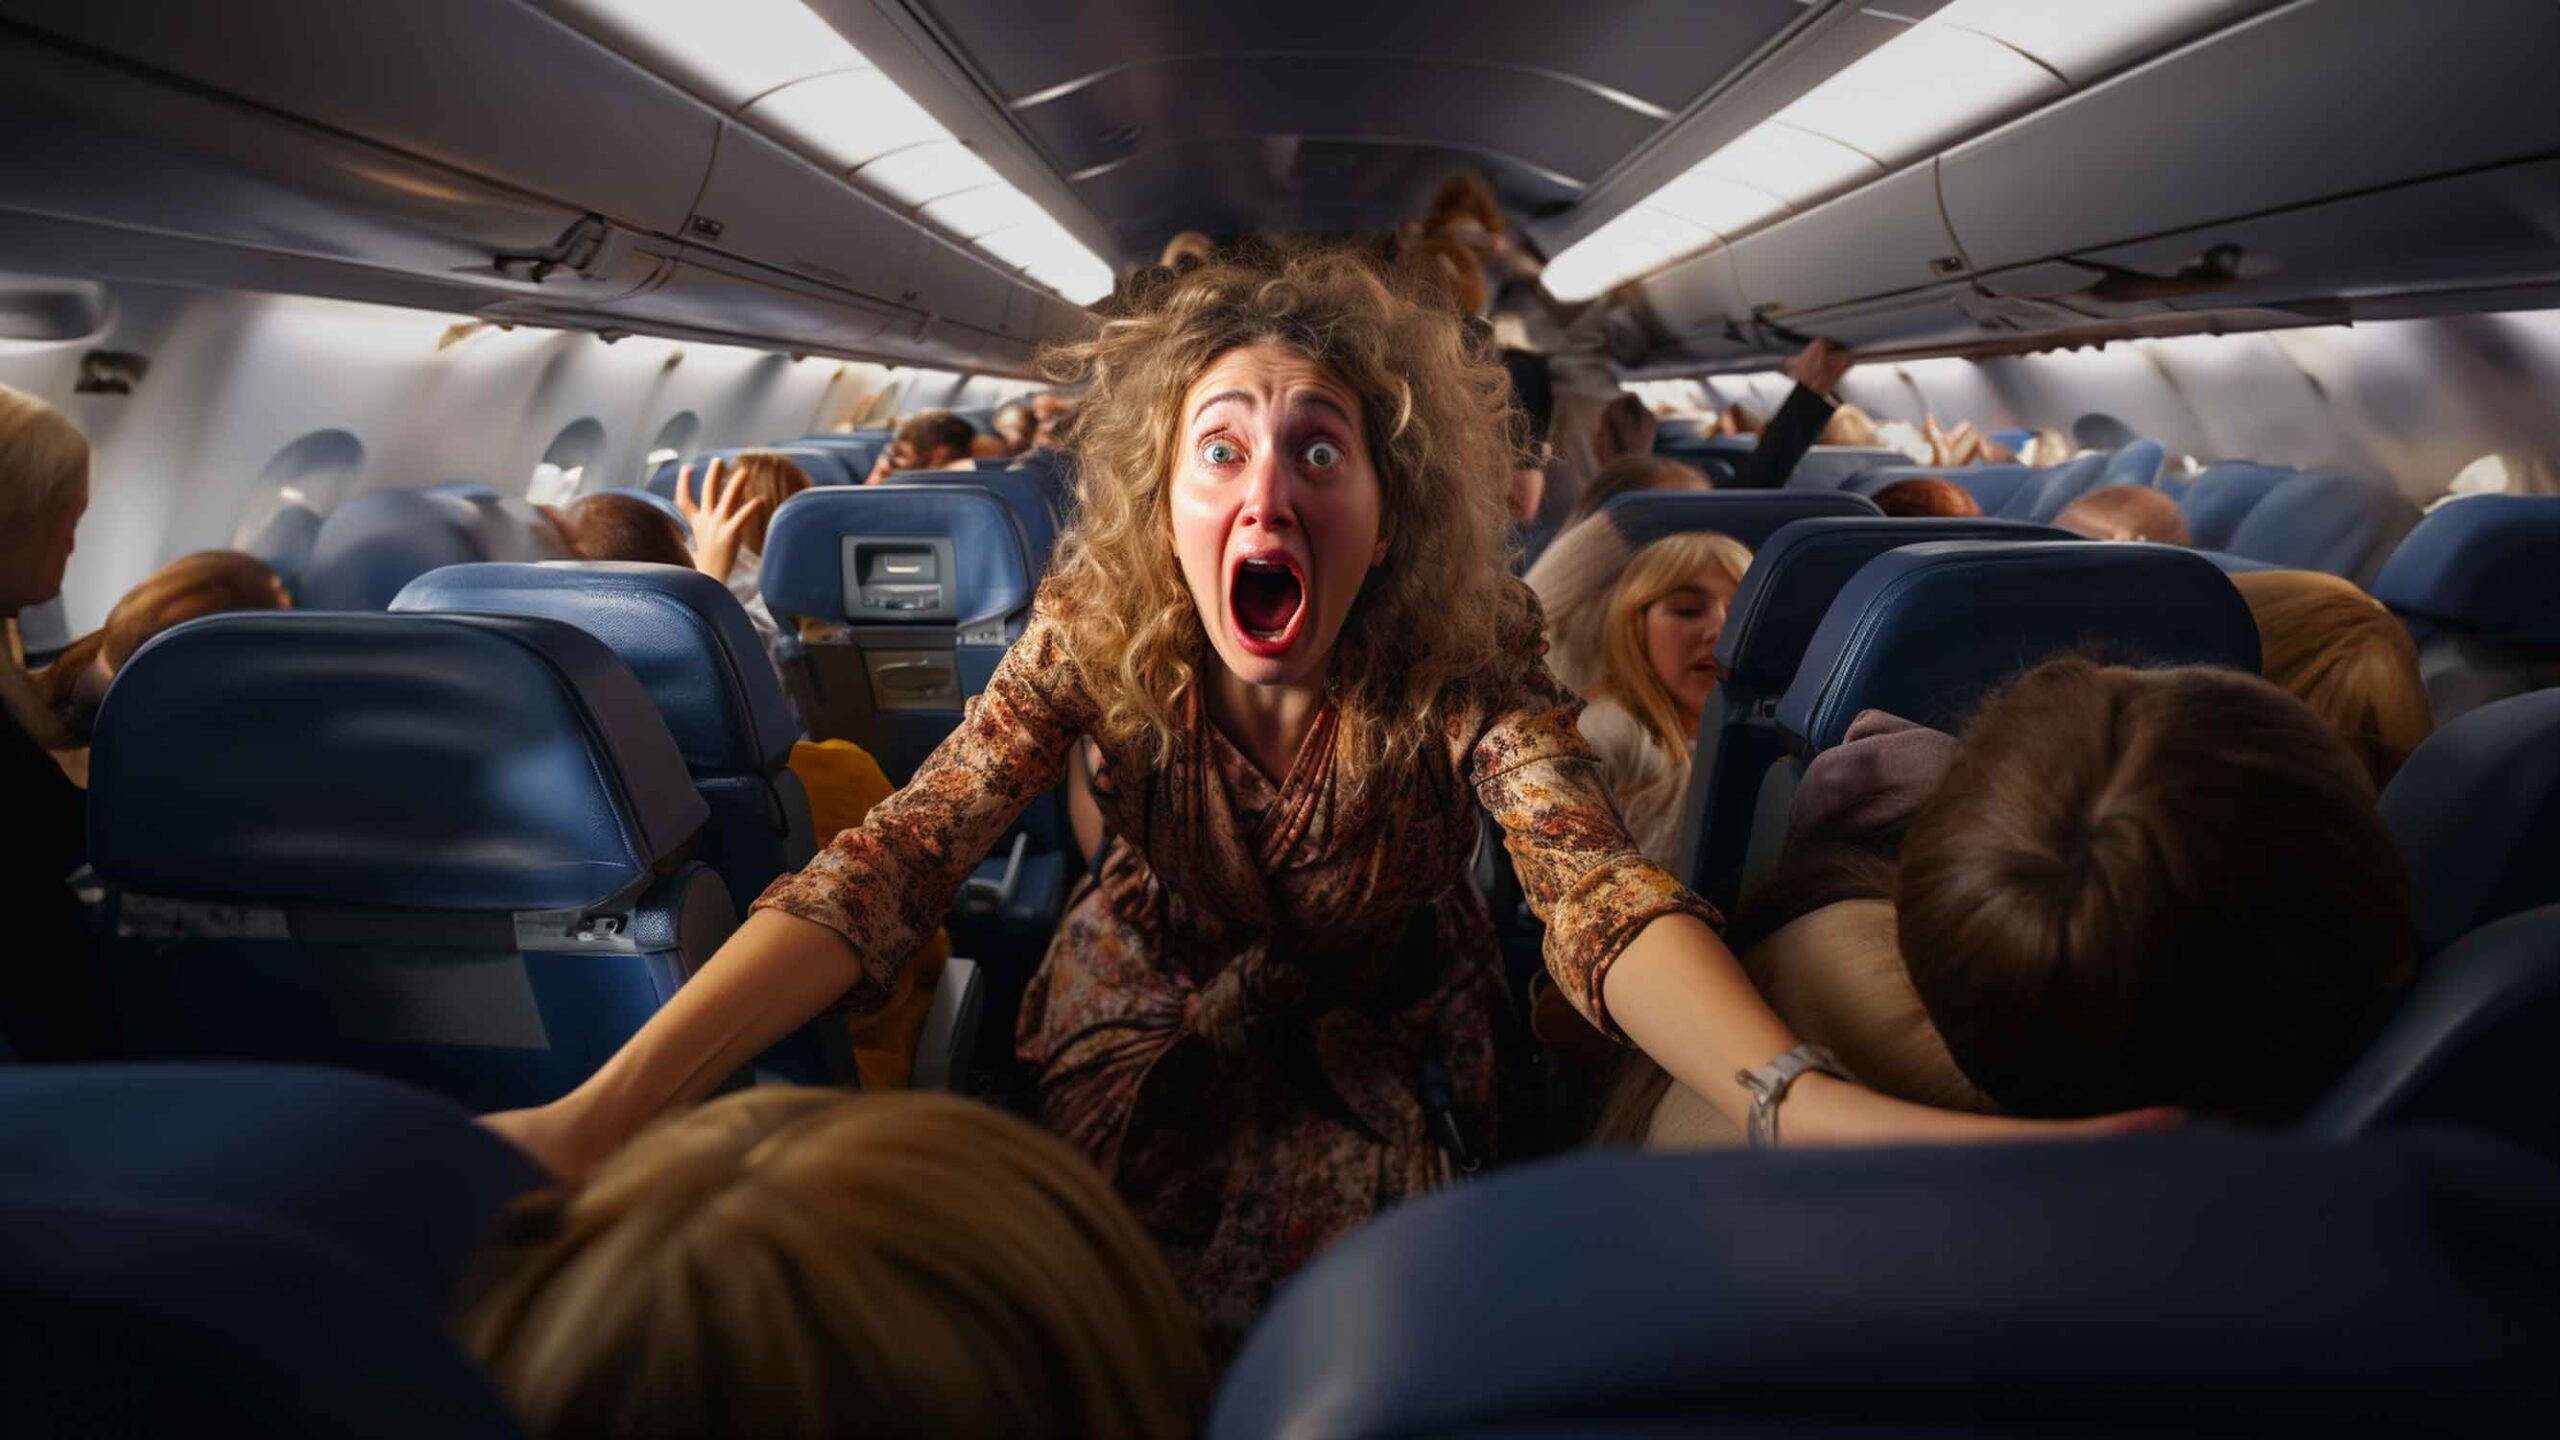 Frightened Woman On A Crowded Plane Worried About The Safest Place To Sit On A Plane.